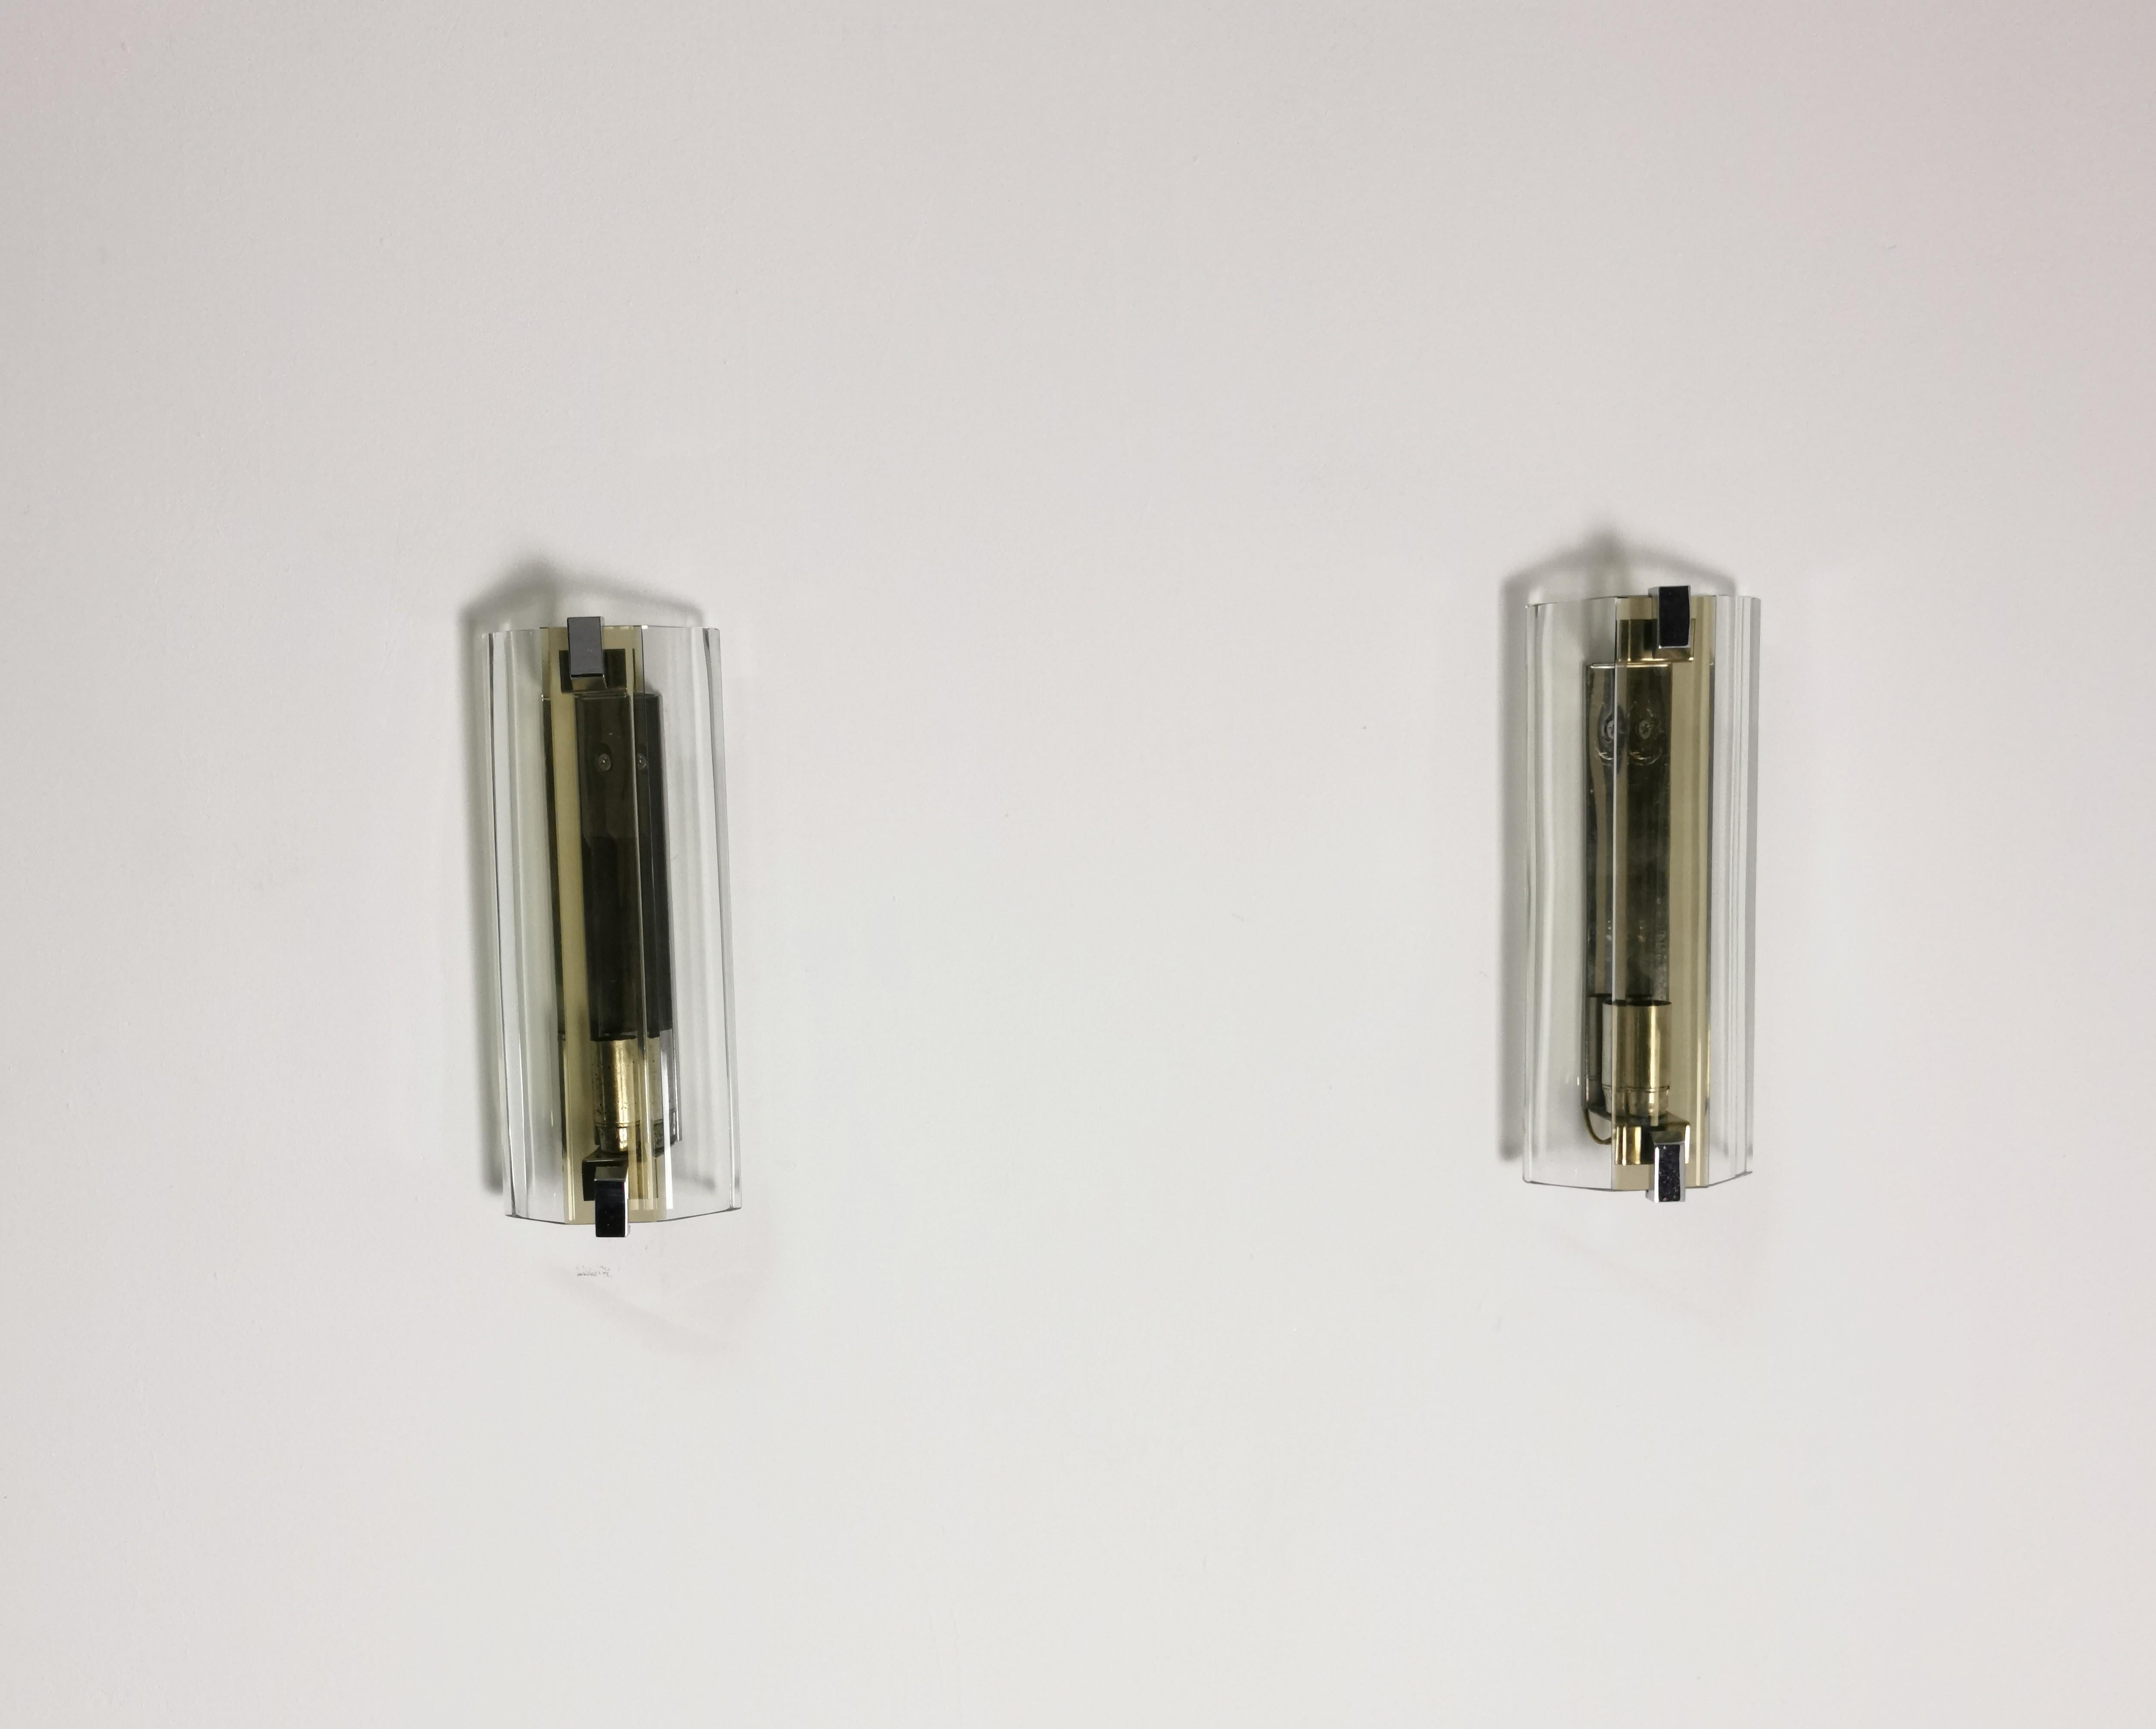 Midcentury Wall Lights Sconces Glass Metal Aluminum Veca Italy 1970s Set of 2 For Sale 7